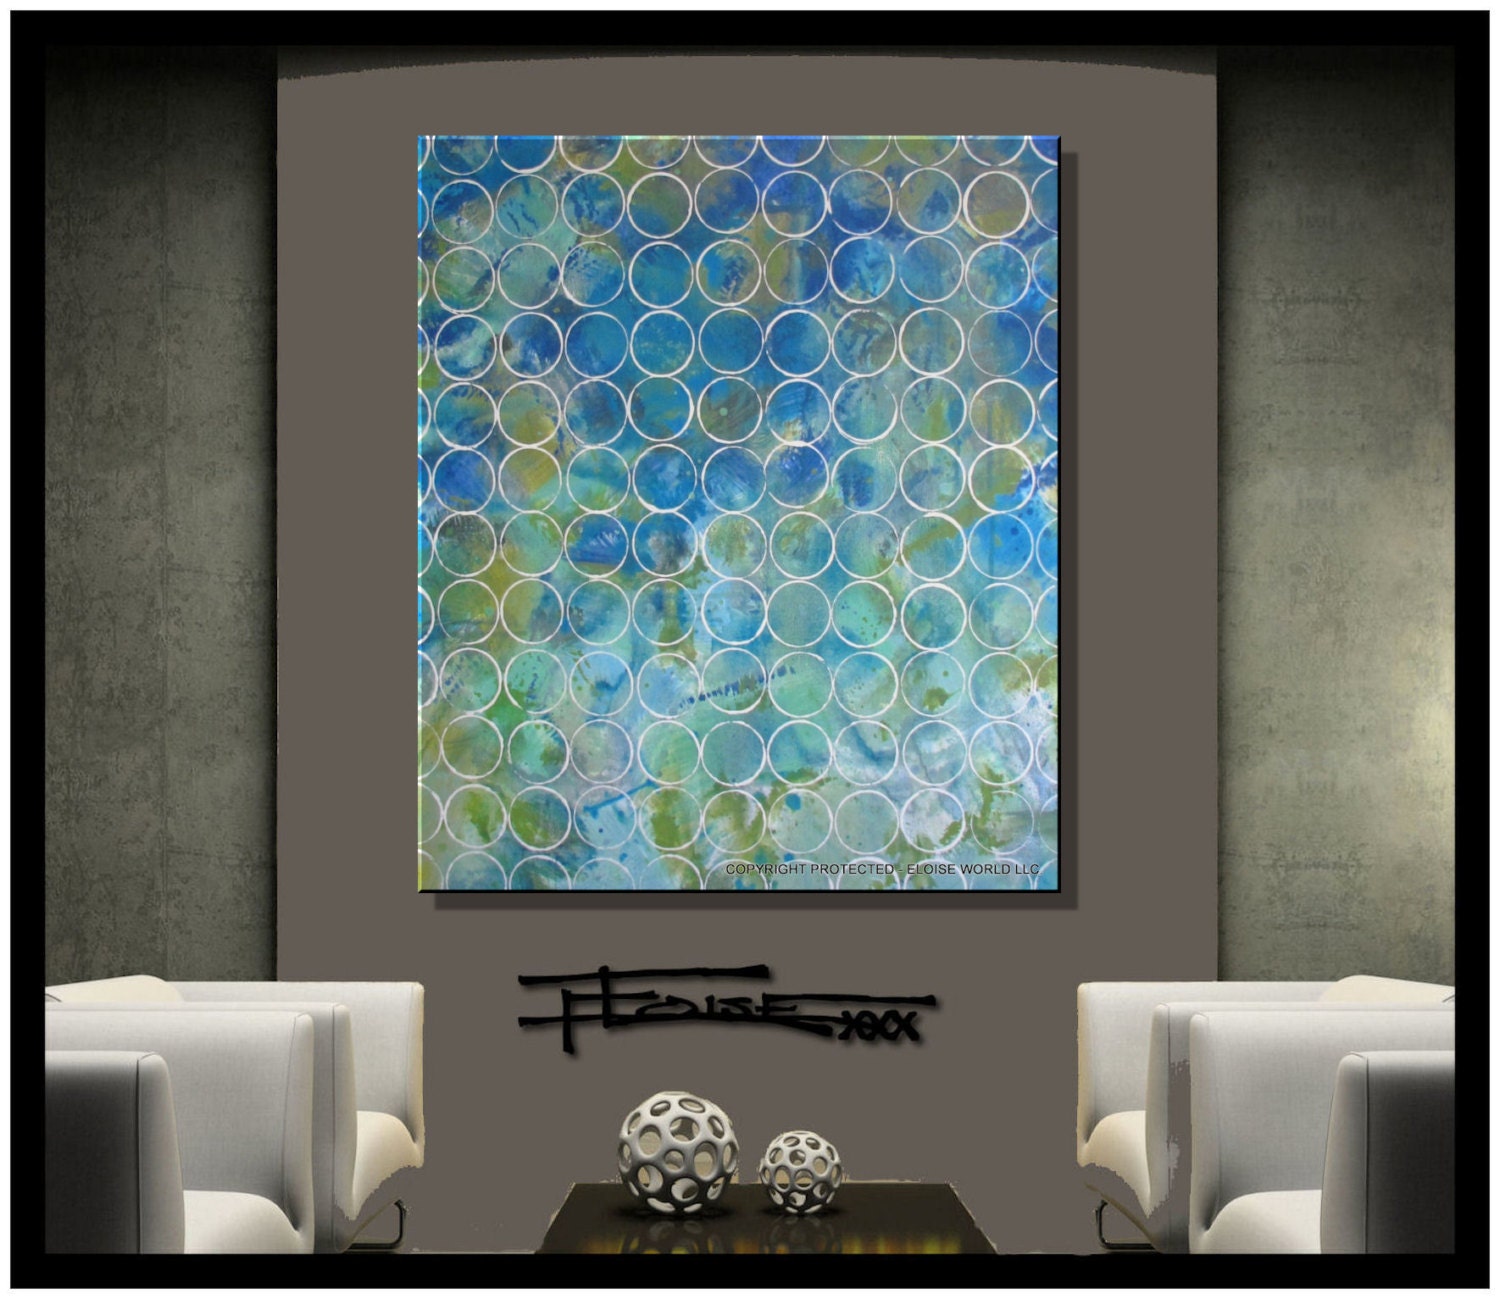 Framed ABSTRACT PAINTING MODERN CANVAS WALL ART Large Signed US  ELOISExxx 